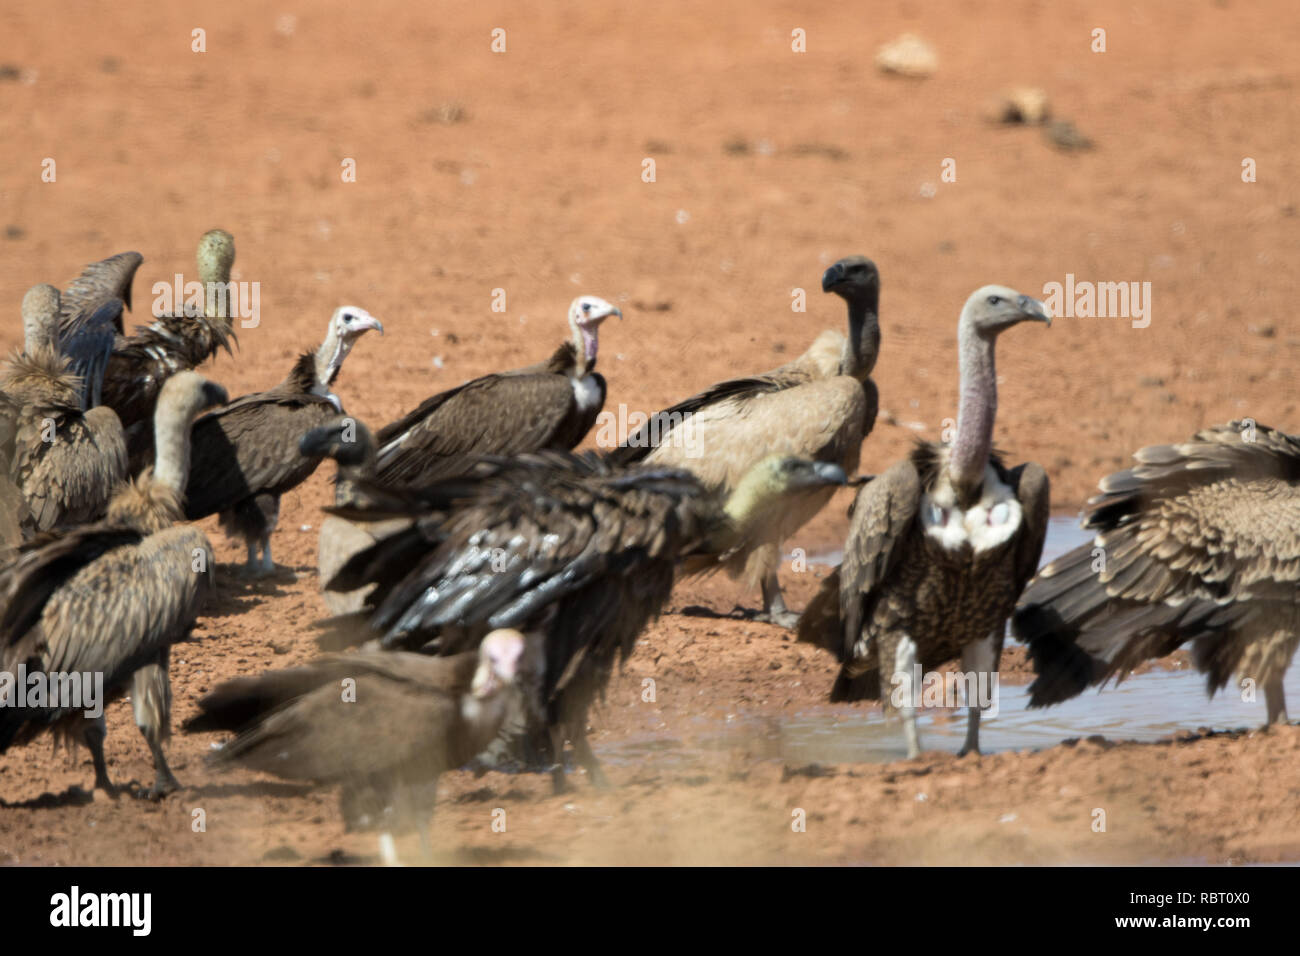 African White-Backed Vulture (Gyps africanus) Foto Stock